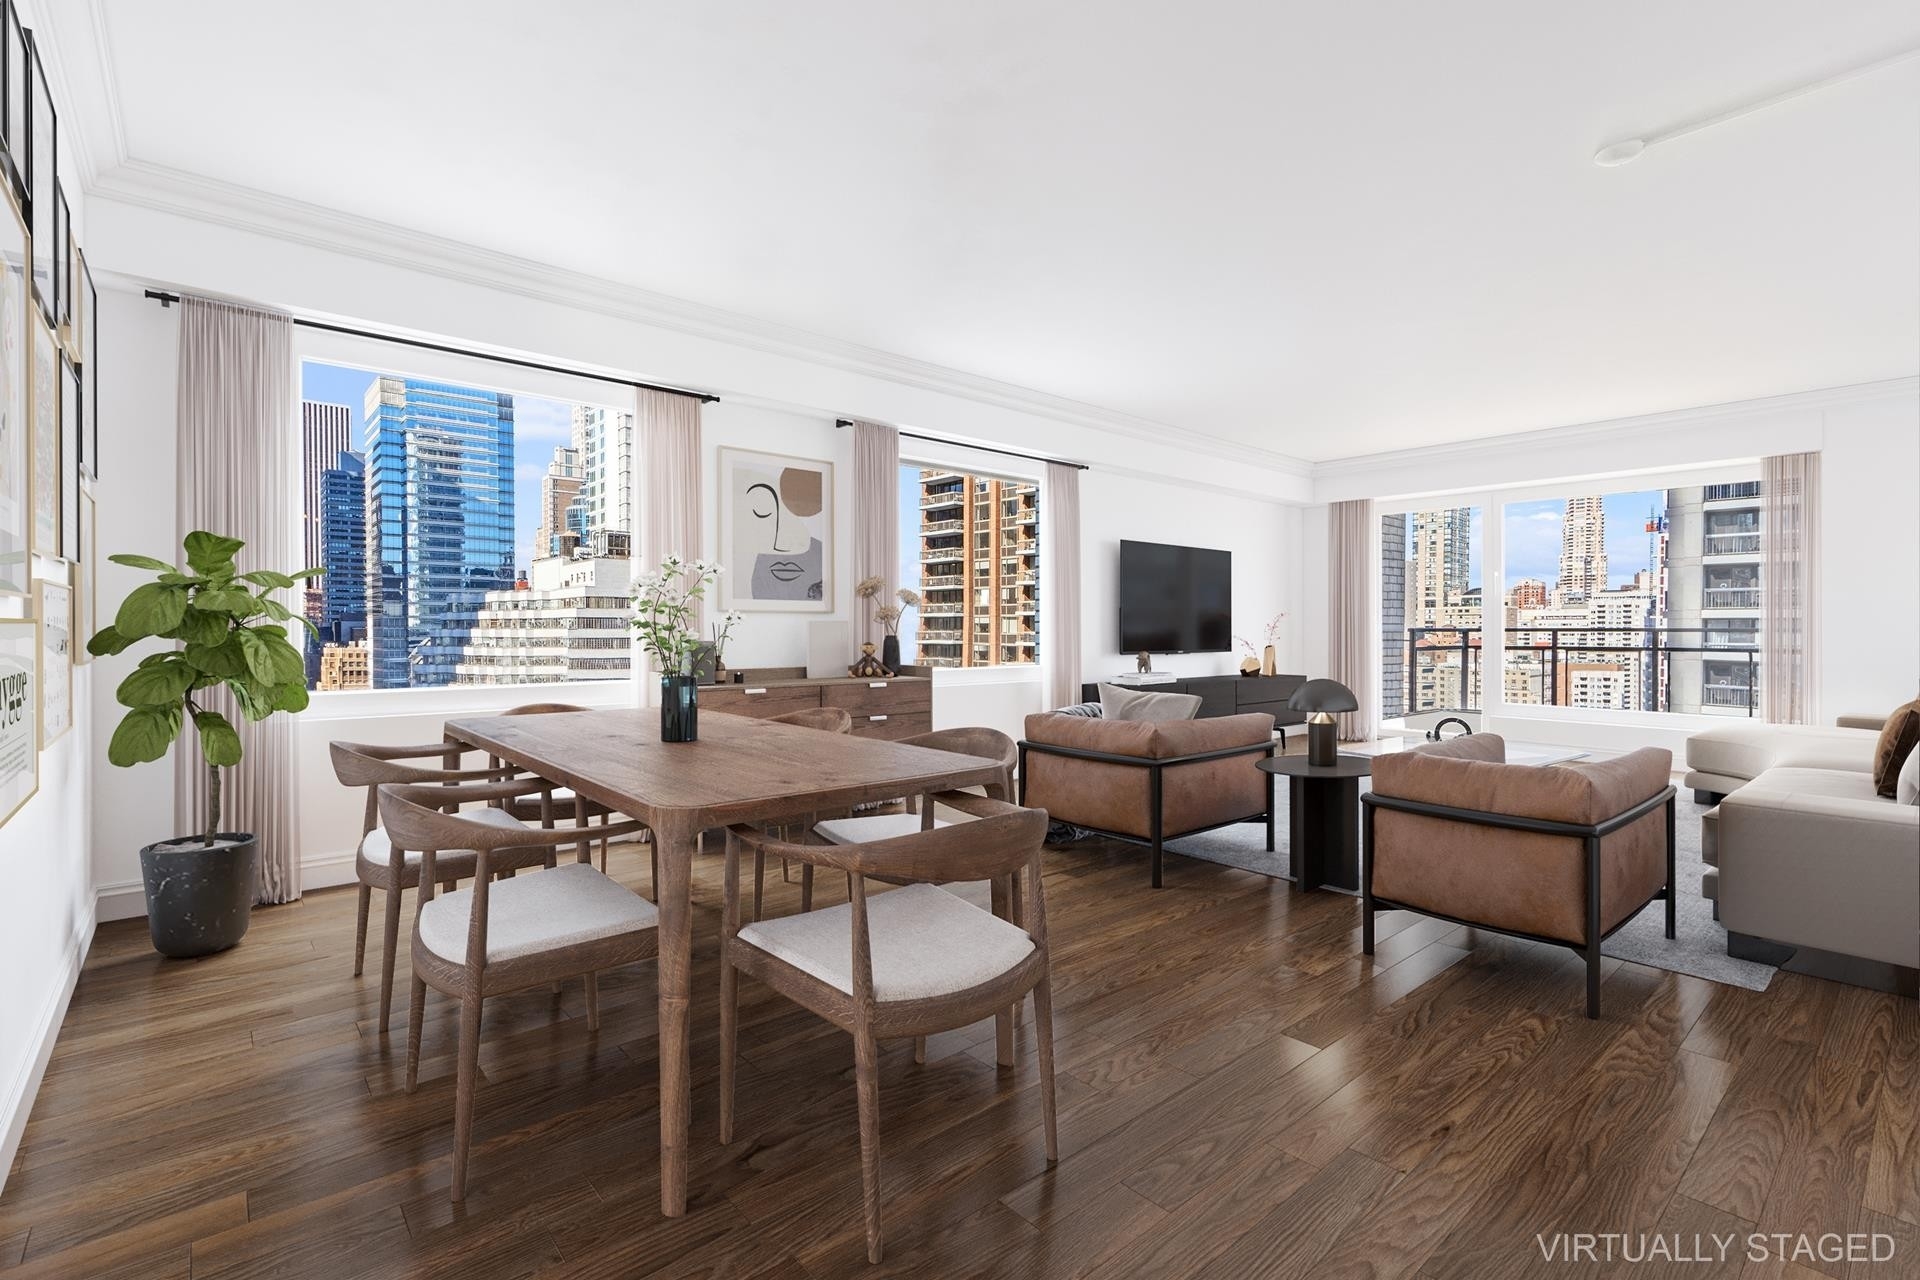 Co-op Properties for Sale at The Excelsior, 303 E 57TH ST, 19G Midtown East, New York, New York 10022